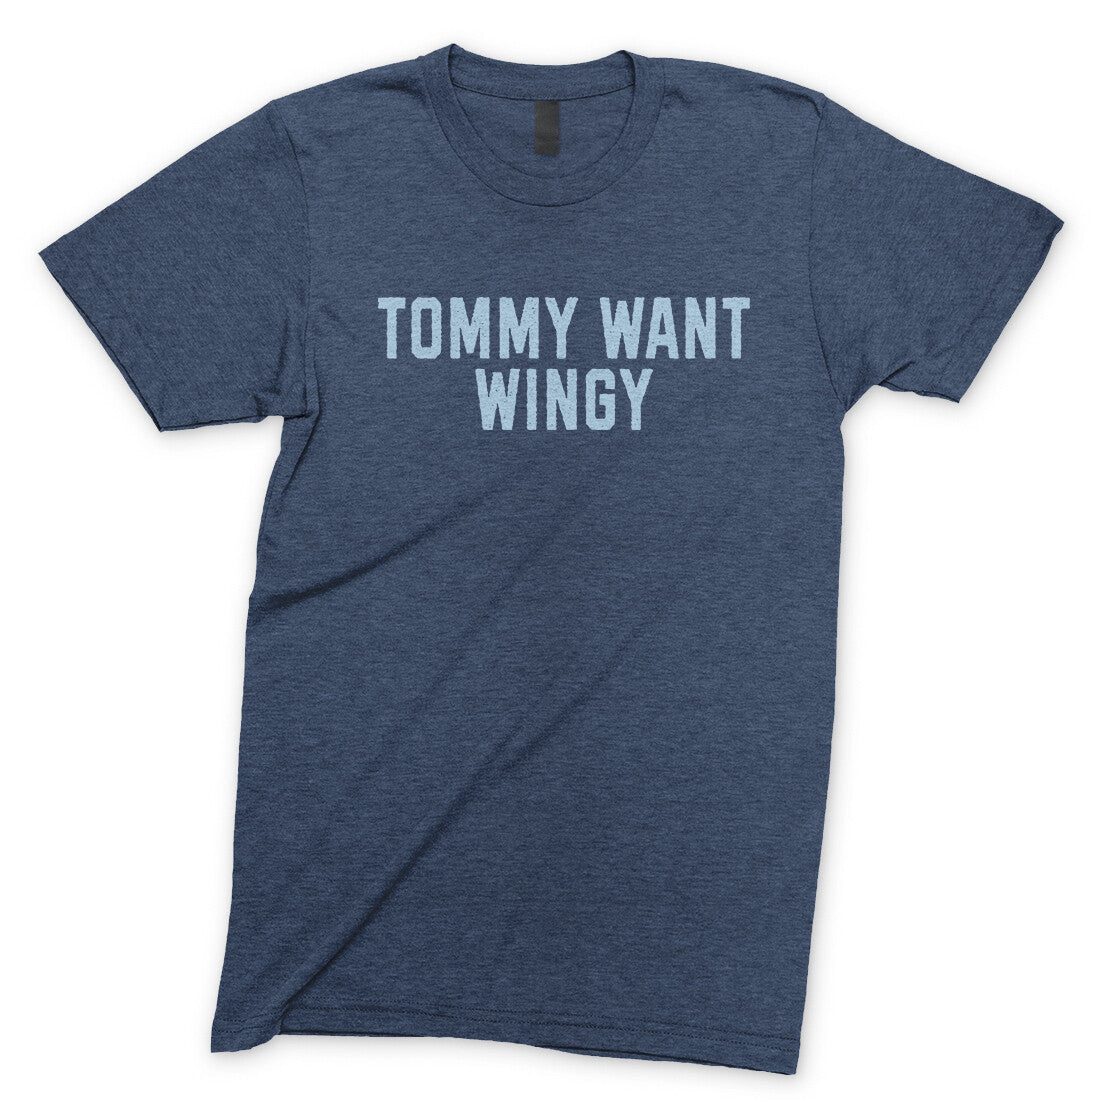 Tommy Want Wingy in Navy Heather Color